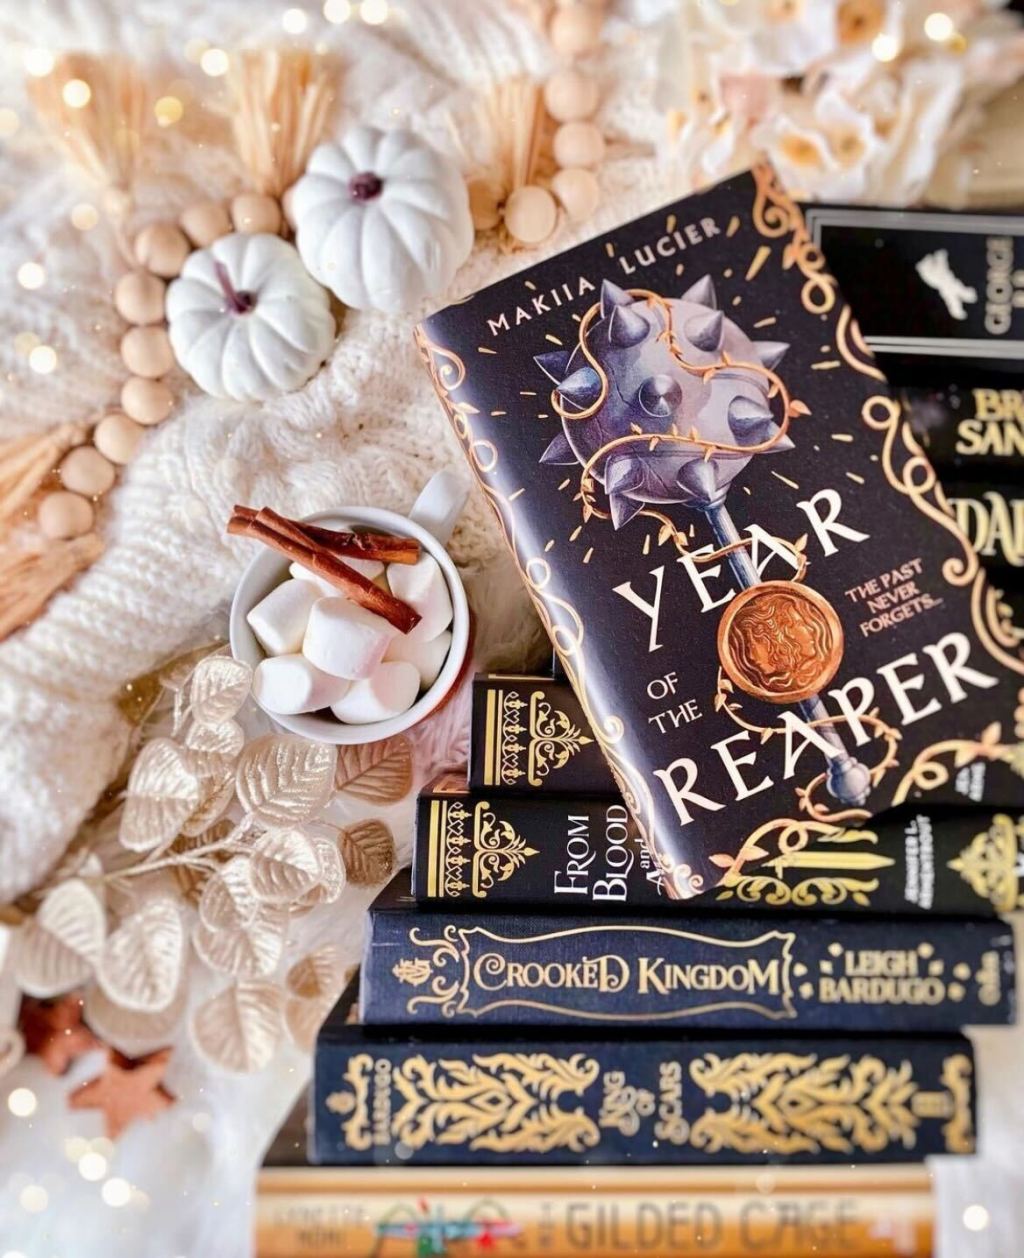 Year of the Reaper Readalong Day 1!